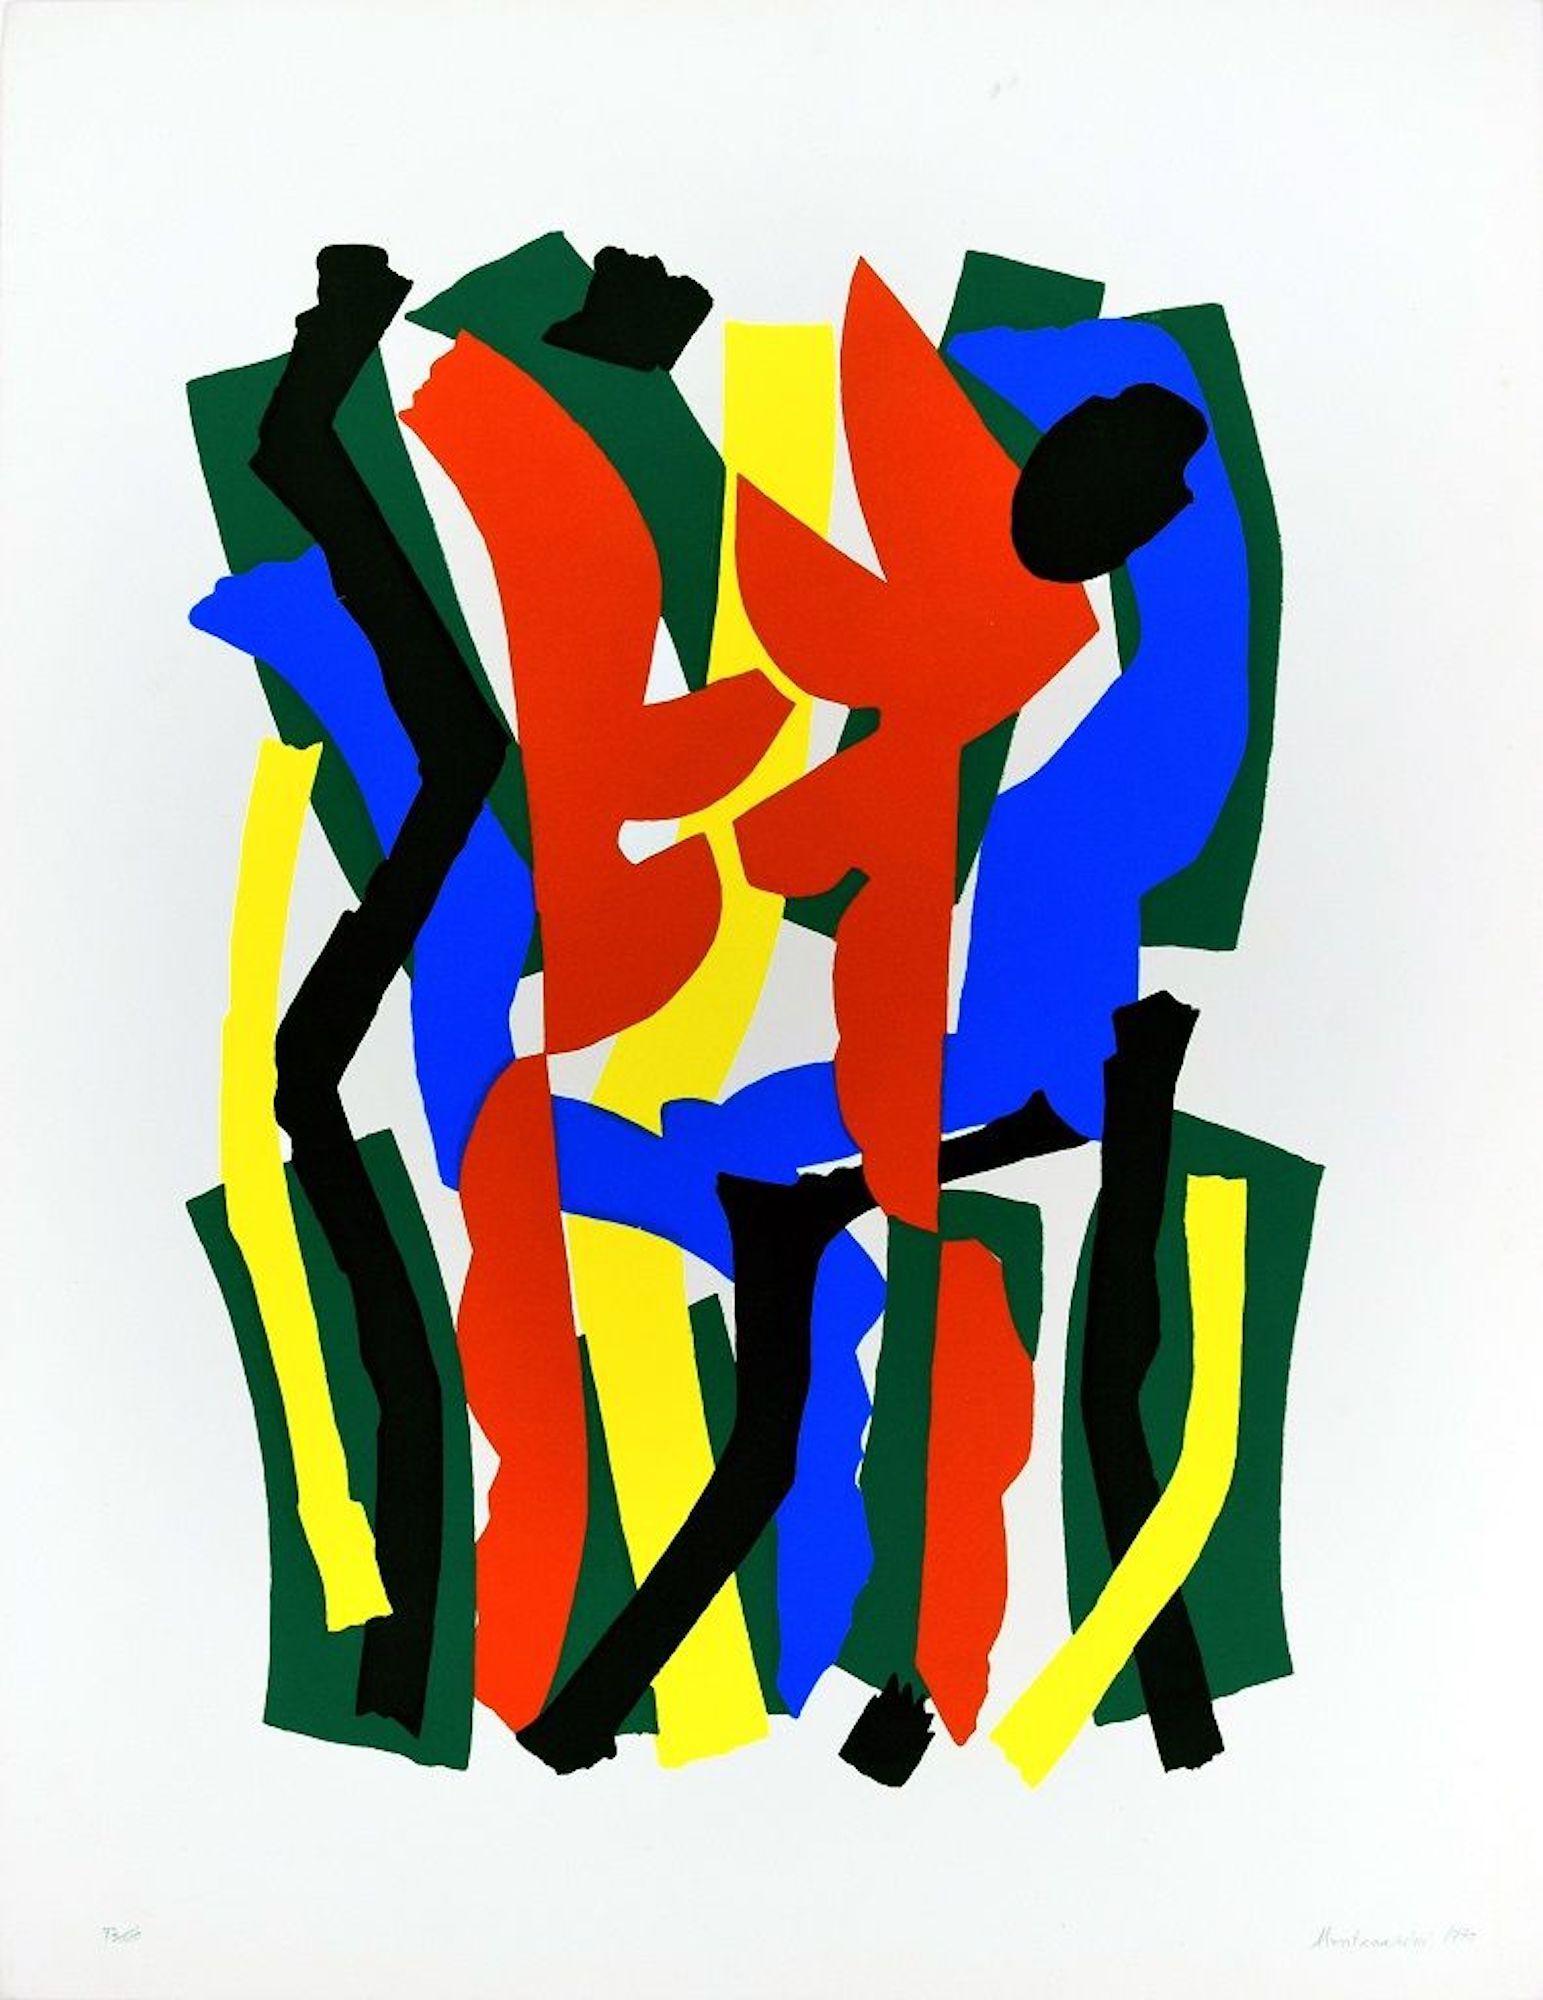 Untitled is a beautiful colored serigraph on paper, realized in 1970 by the Italian artist, Luigi Montanarini (1906-1998) and published by La Nuova Foglio, a publishing house of Macerata, Italy. 

Image dimensions: 49 x 37 cm.

Hand-signed and